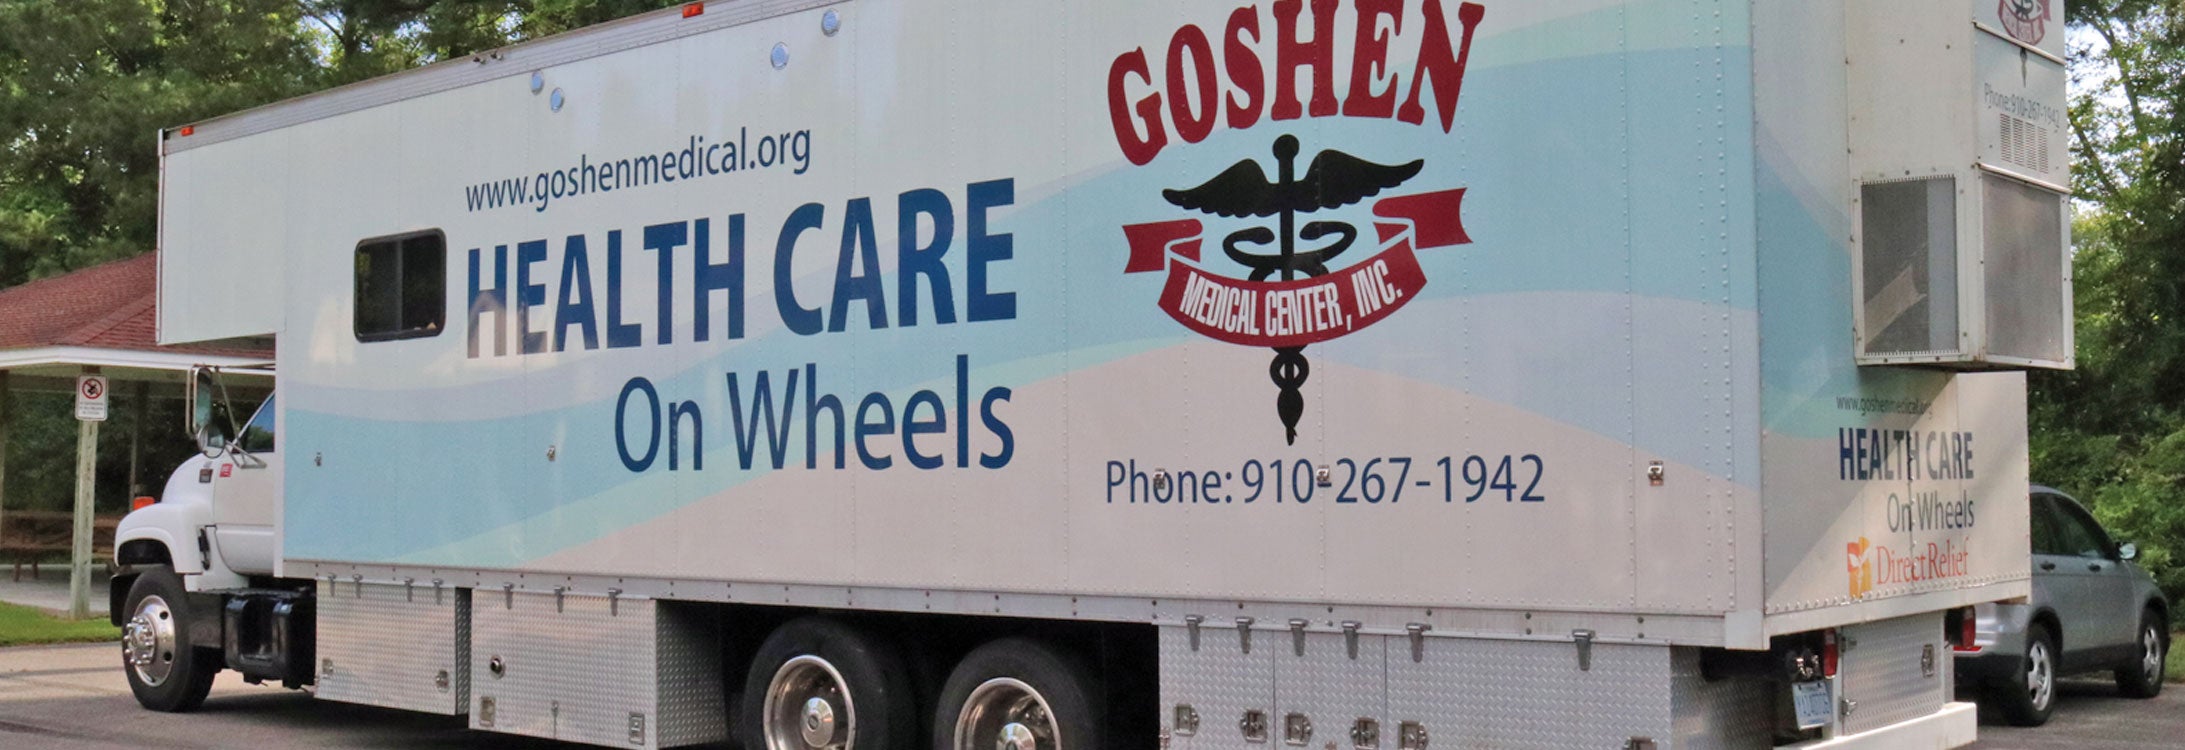 Above, the Goshen Medical Center mobile van was on display at a GWEP health screening in Varnamtown. The van provides medical care to rural residents who struggle receiving traditional health care services. Photo by Matt Smith.